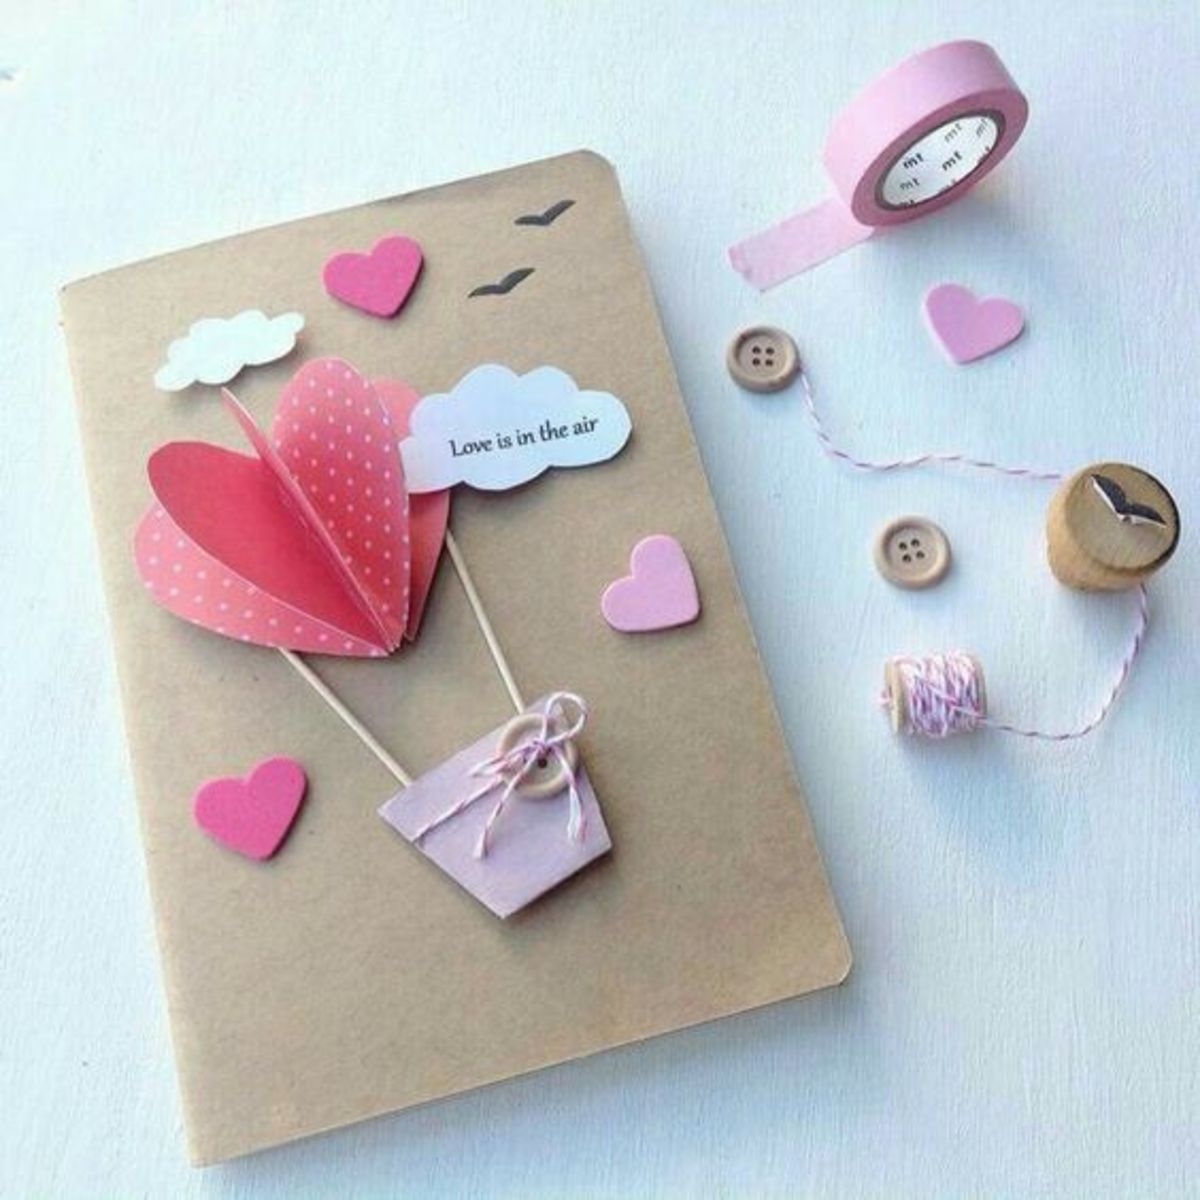 50+ Adorable and Creative DIY Valentine's Day Cards